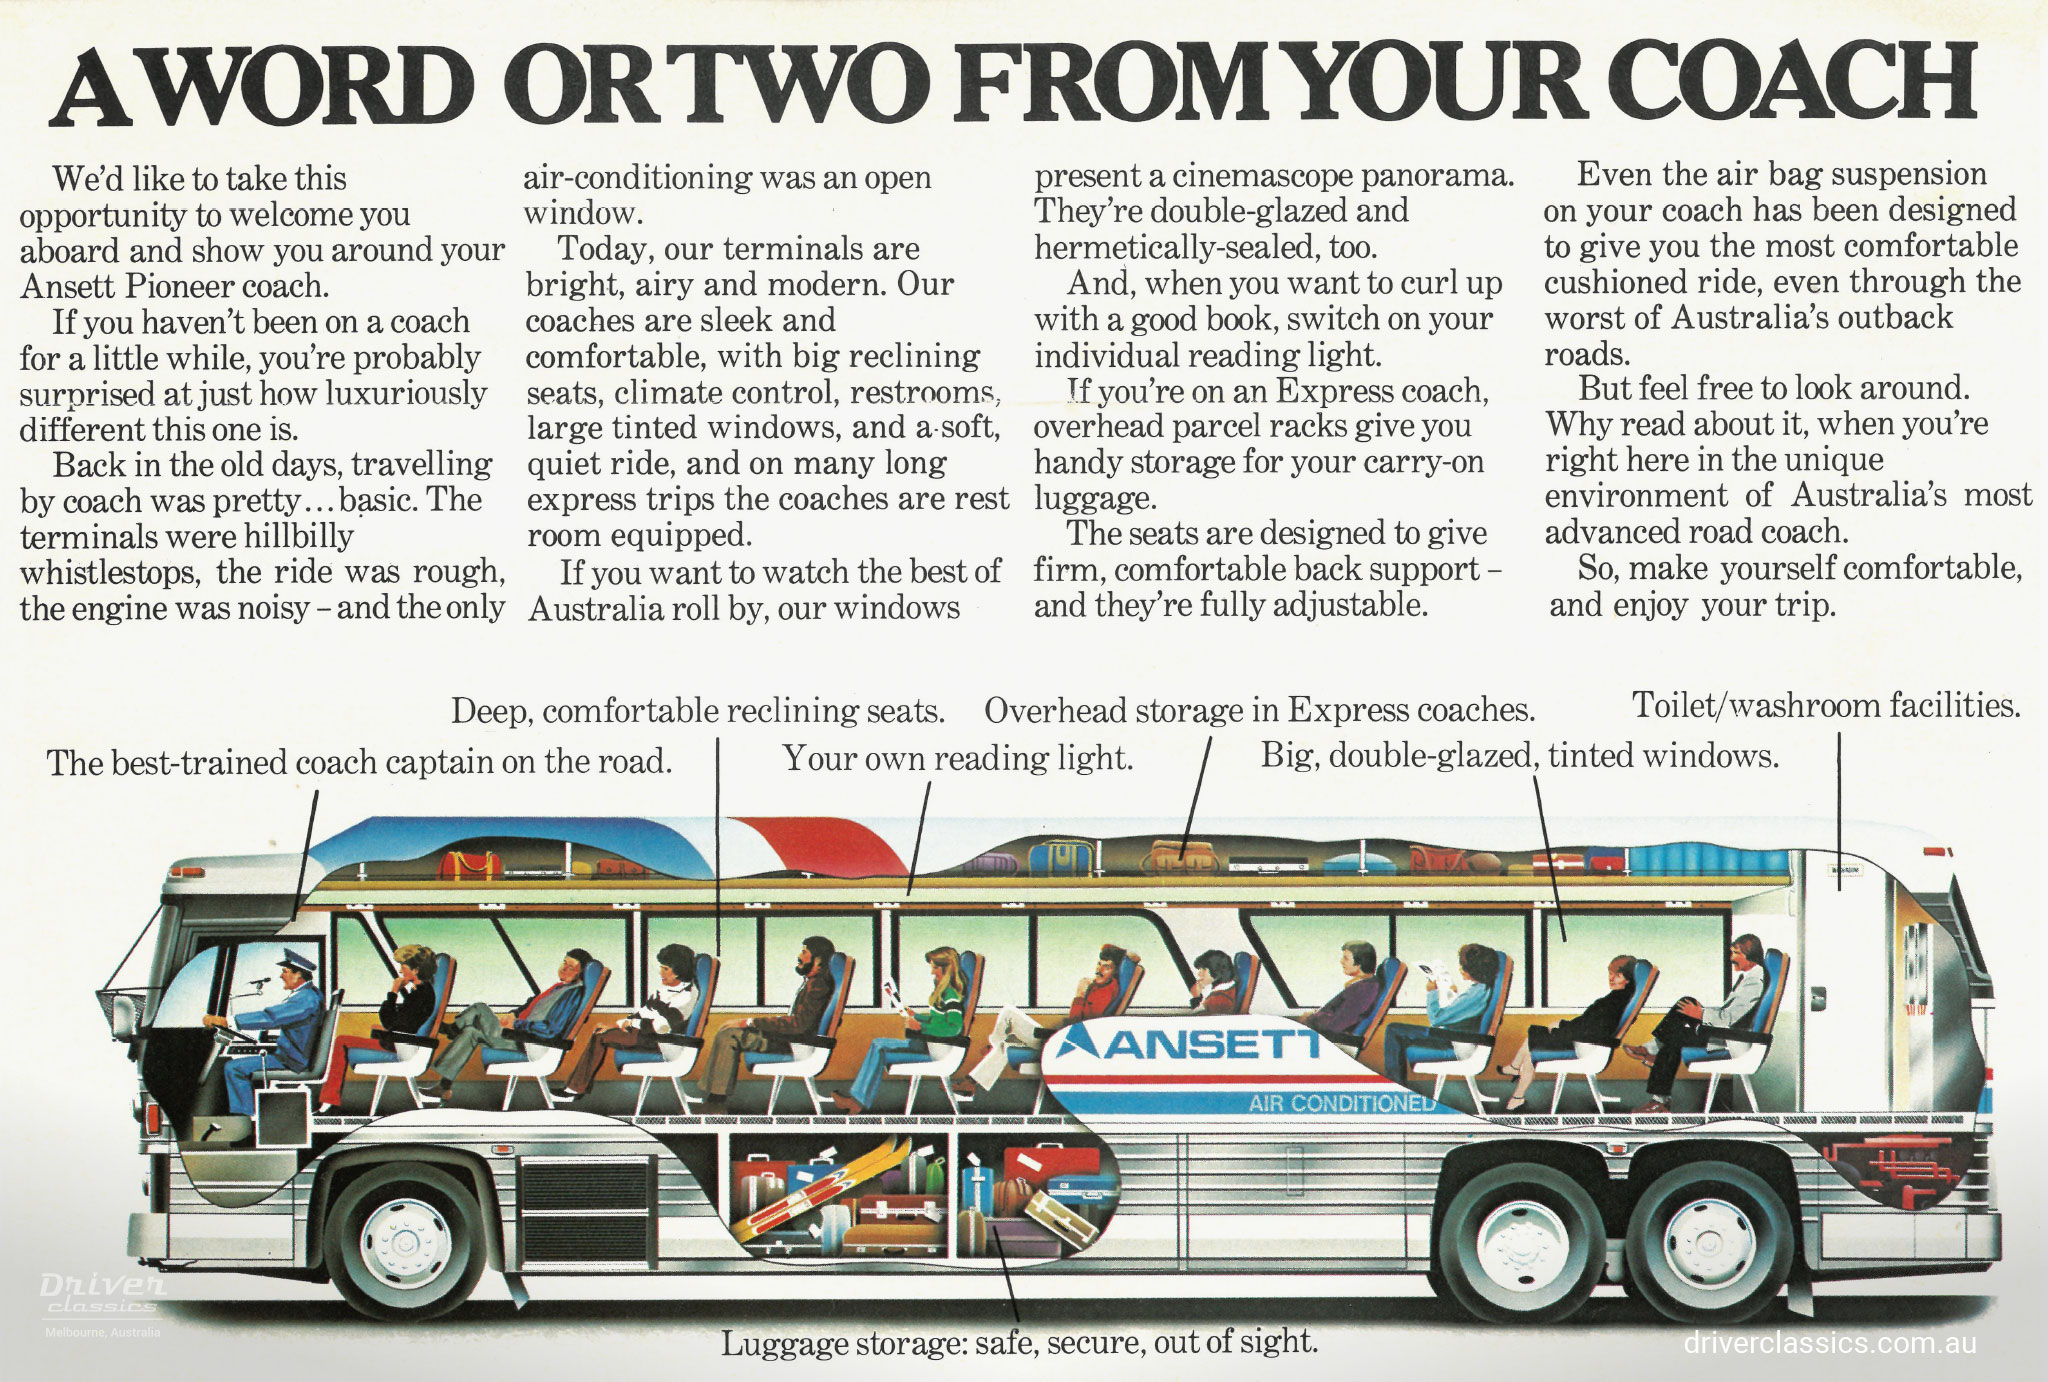 MCI MC8 bus featuring in Ansett Pioneer advertising as an illustration. Late 1970s.